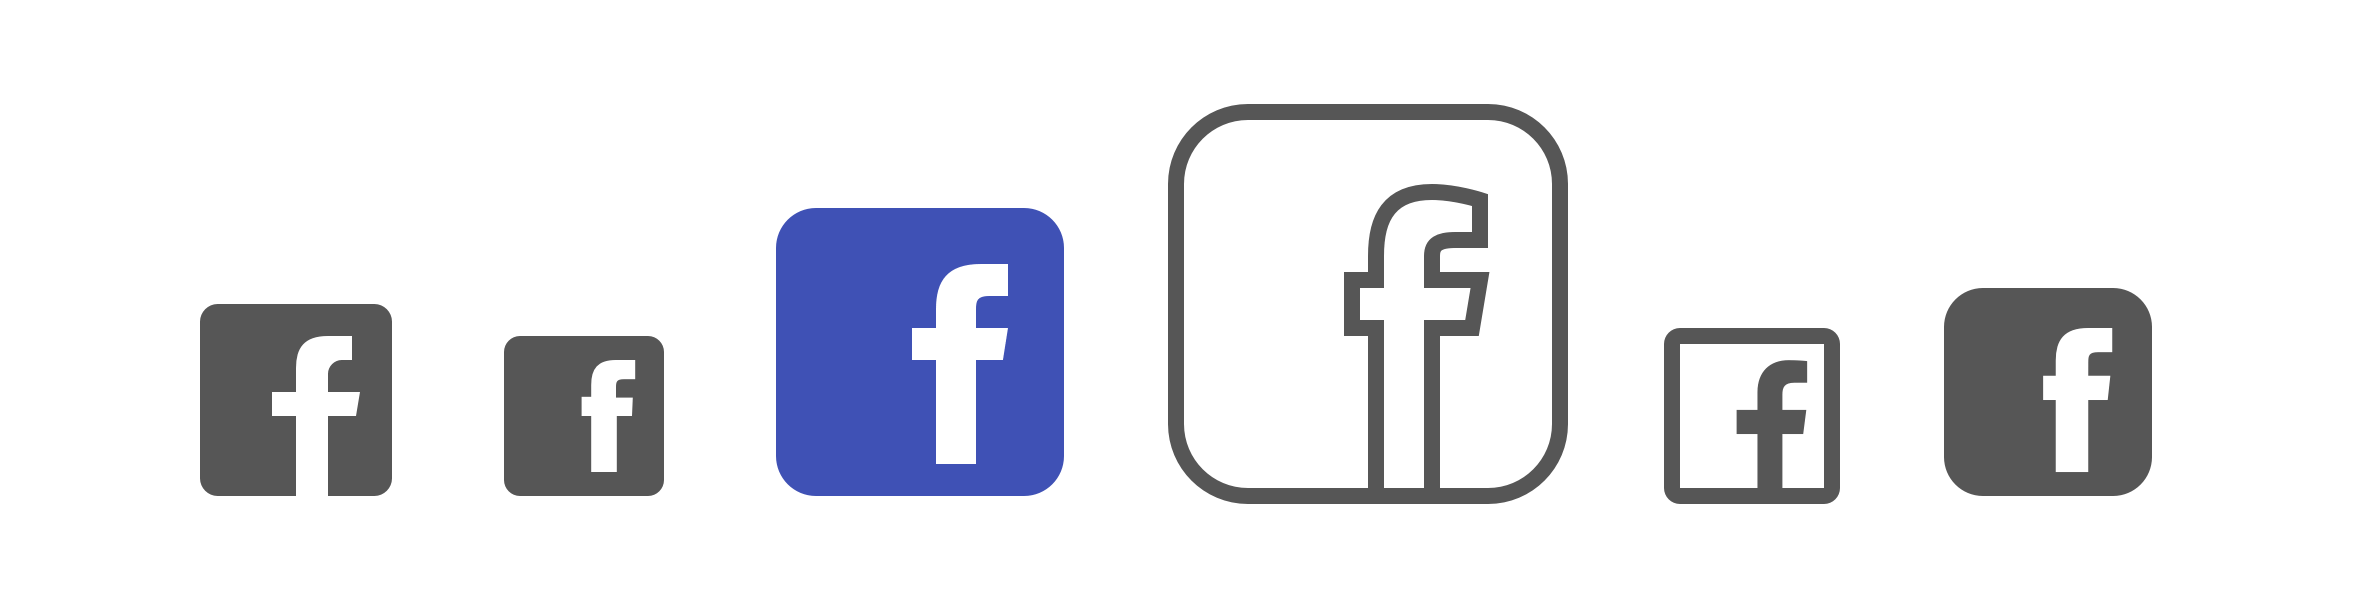 Facebook Logo - Facebook Icon - free download, PNG and vector